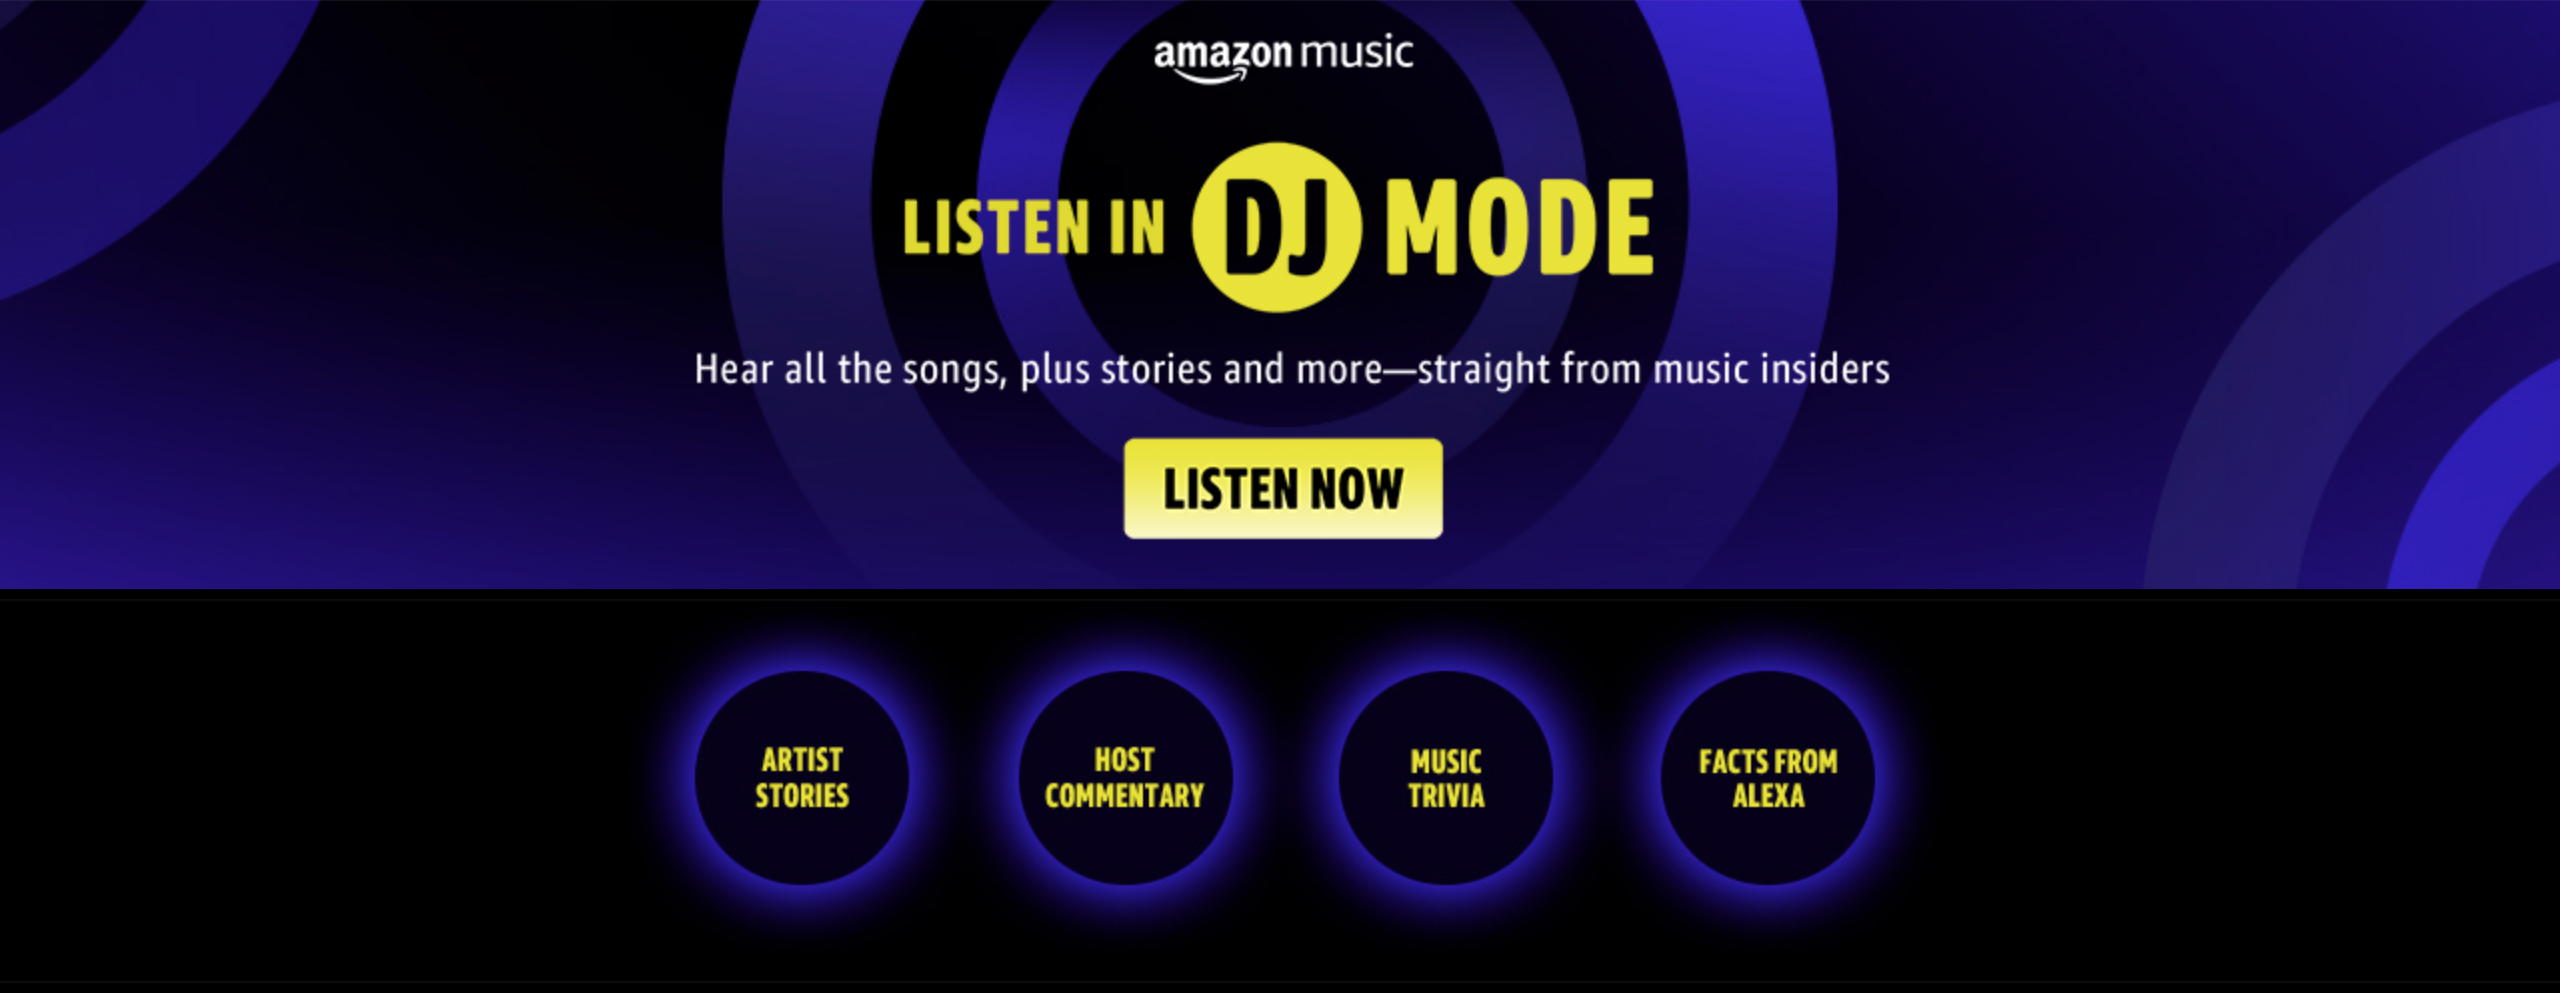 Amazon Music DJ Mode combines music with commentary from artists and hosts